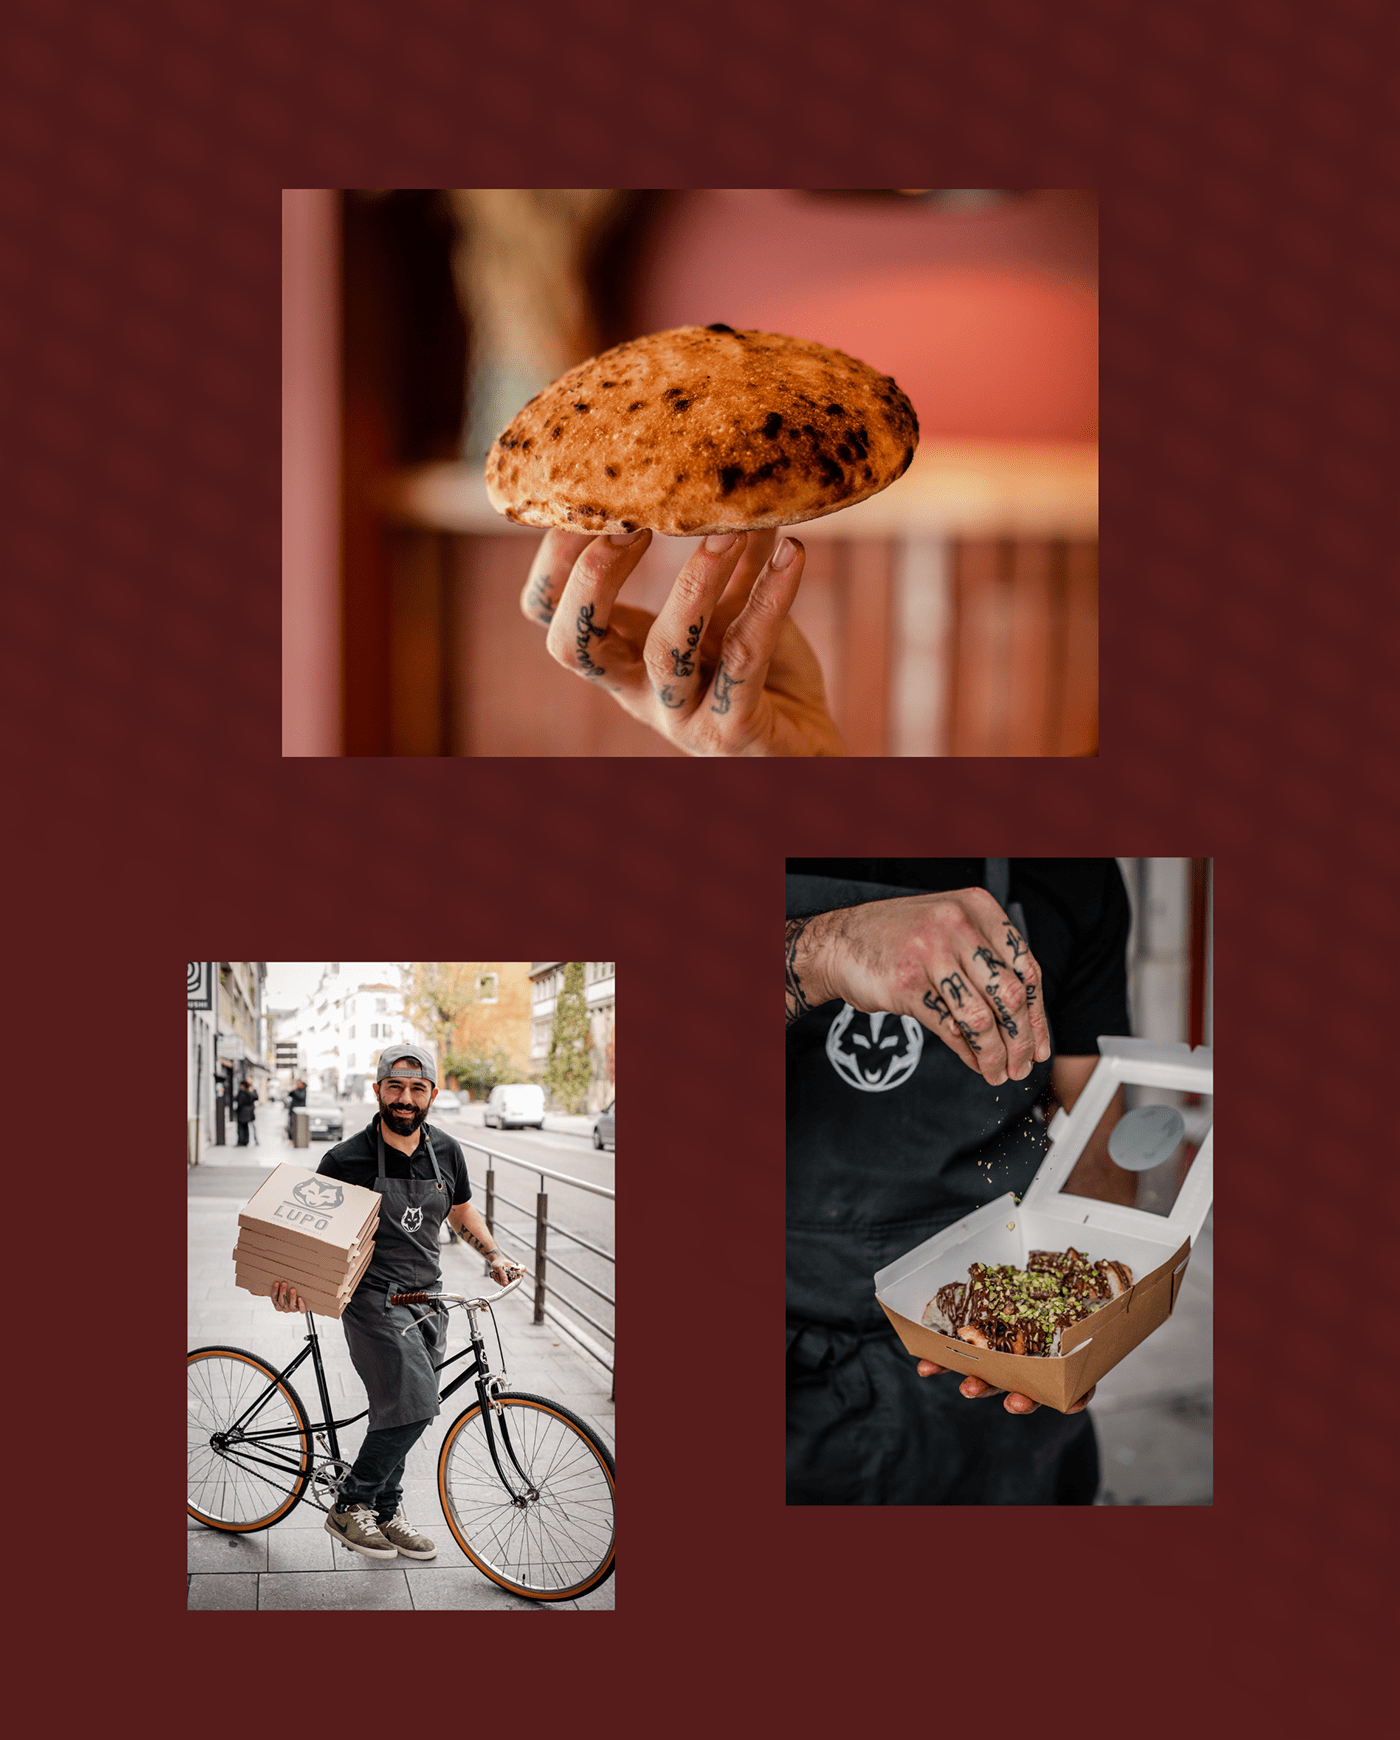 Food  instagram photographie culinaire Pizza social media Street Food Advertising  blogger marketing   post